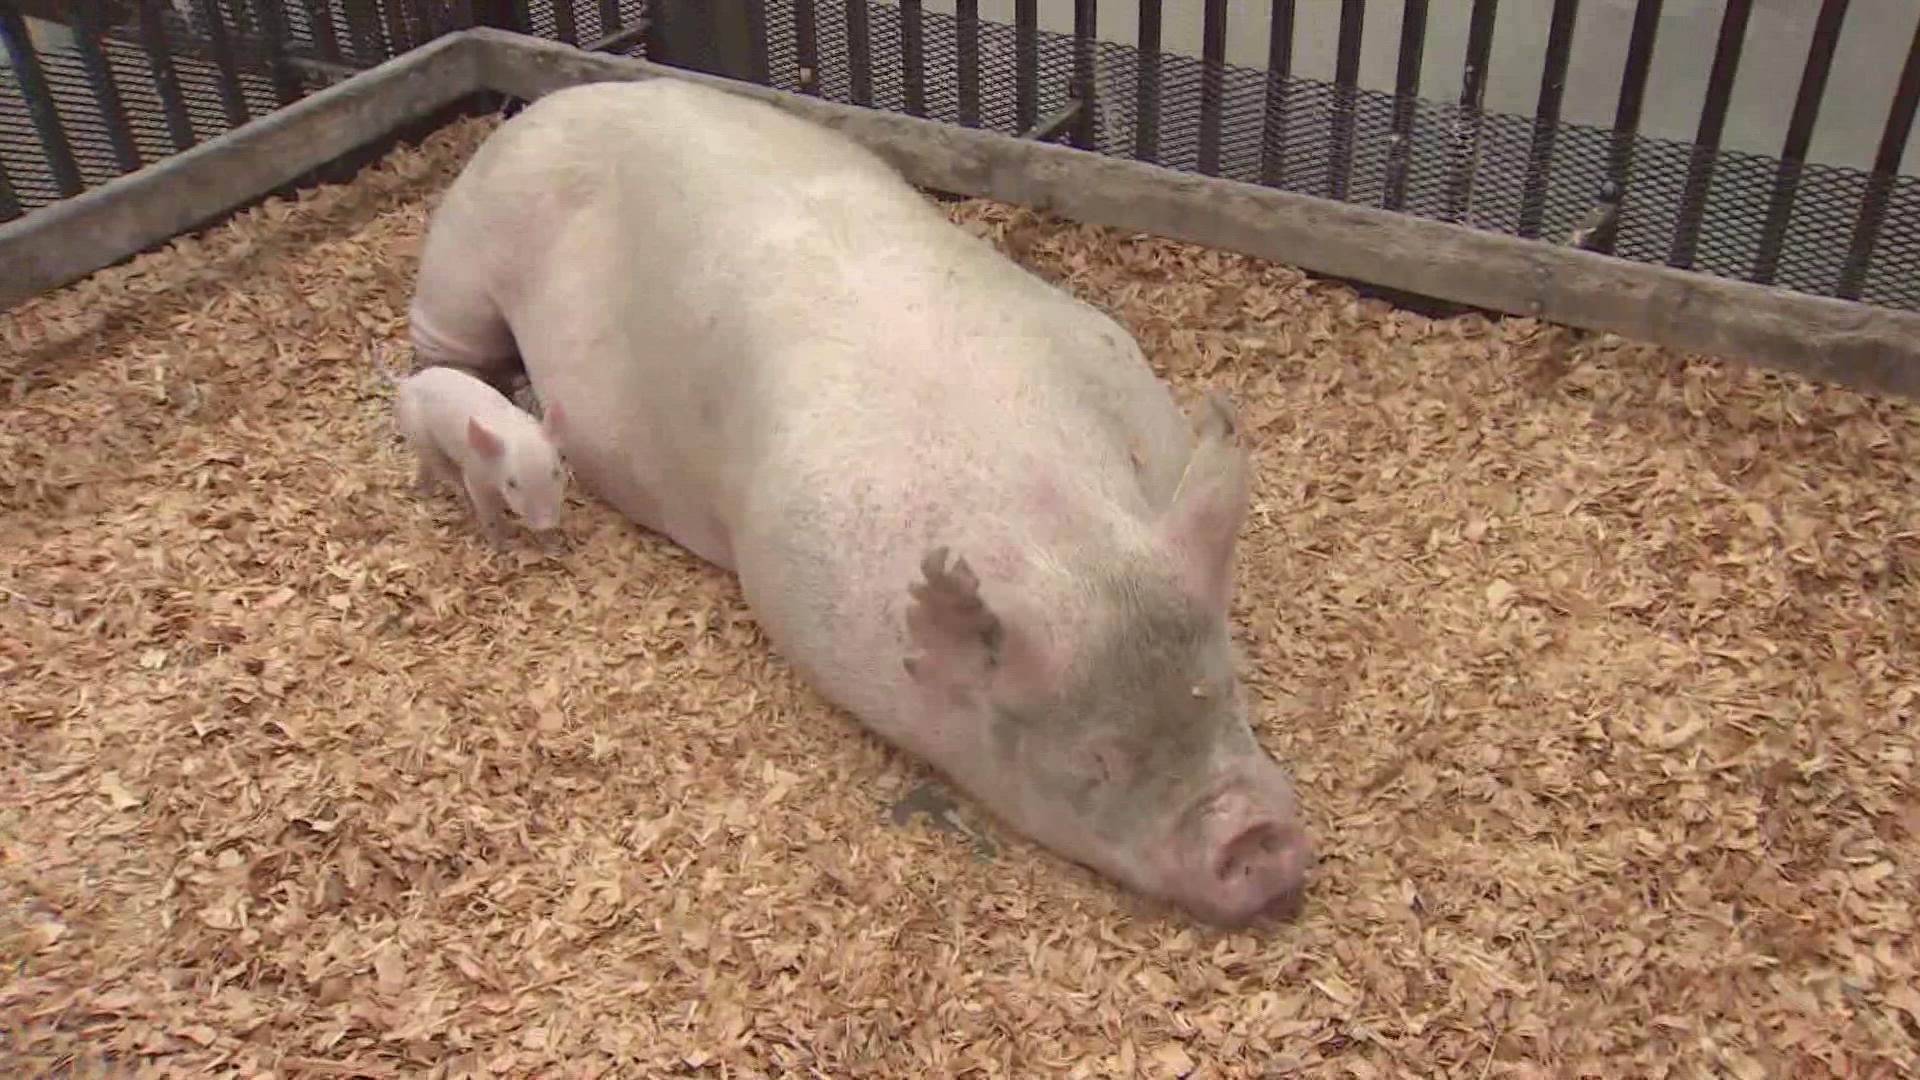 The question for the high court is whether a California animal cruelty law improperly burdens the pork market.